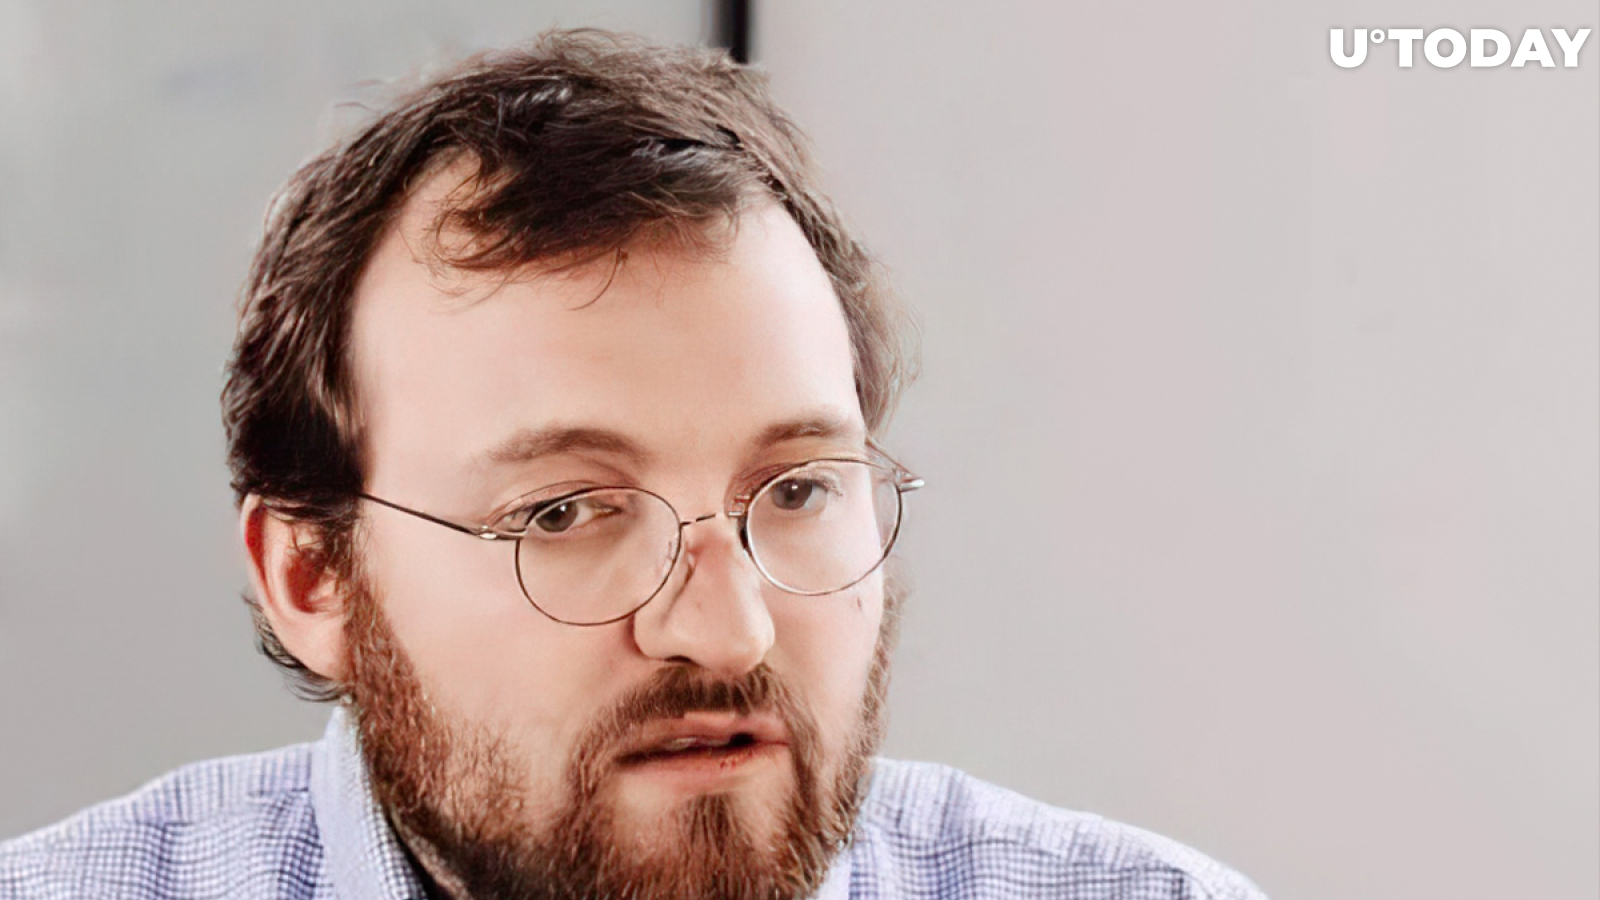 Charles Hoskinson Weighs In on U.S. Government Potentially Banning Bitcoin and Cardano